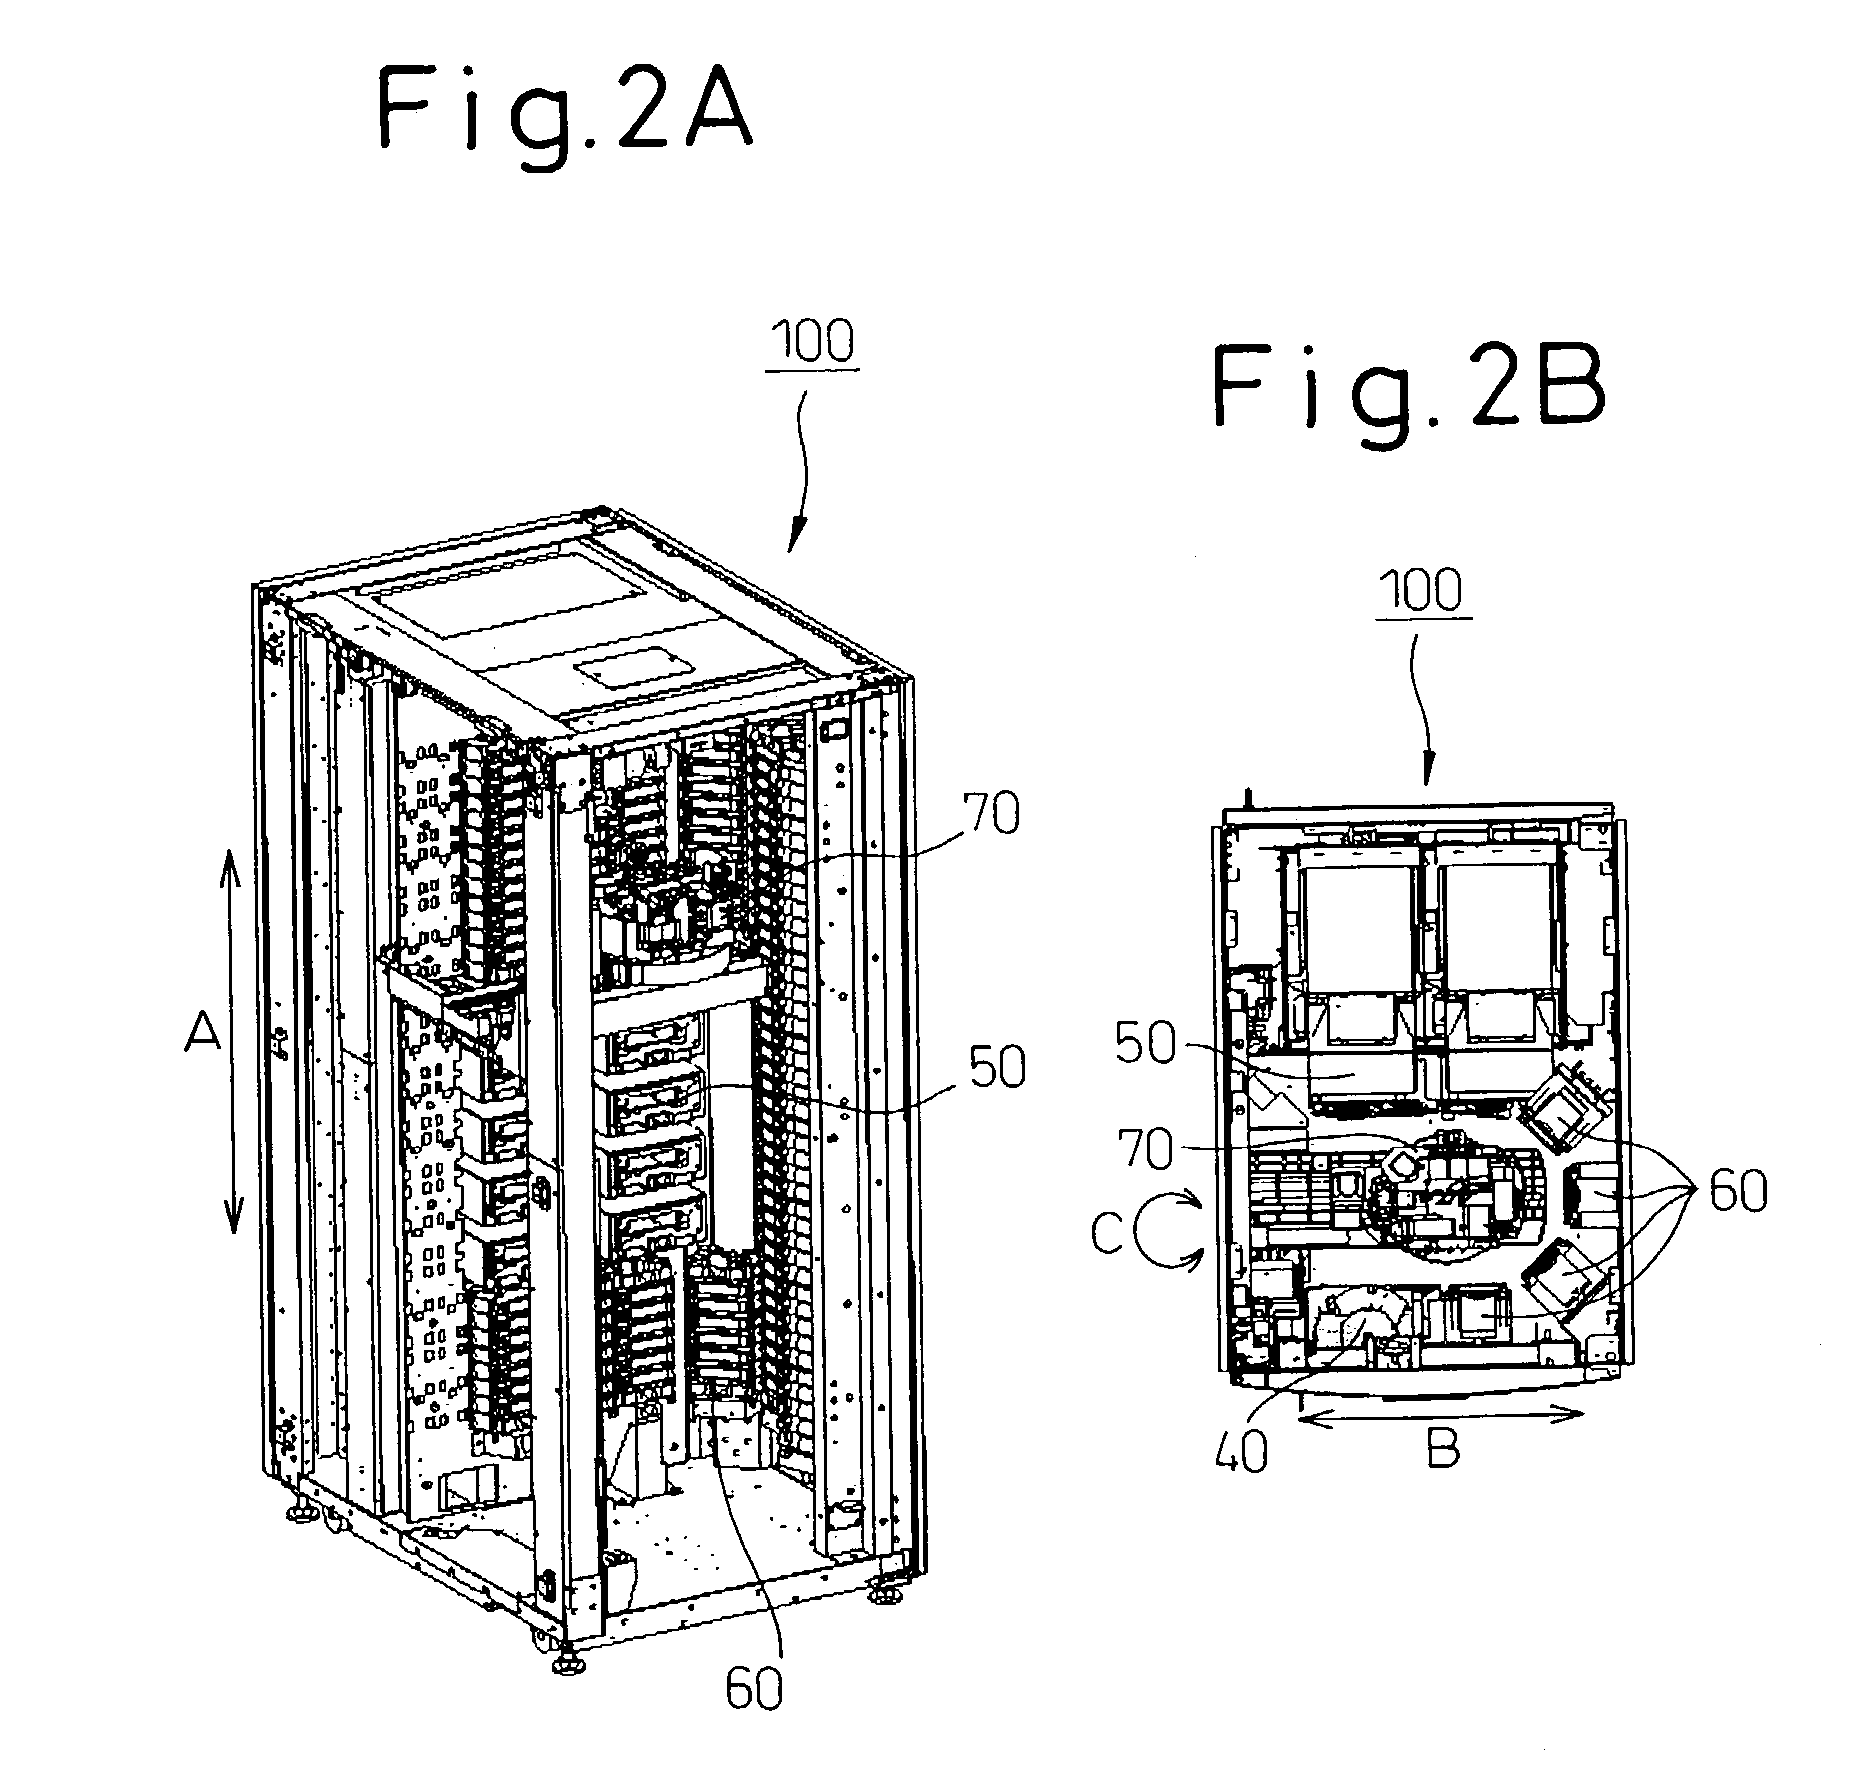 Robot hand for transferring an article in a housing, and a library apparatus equipped with the robot hand for transferring and article stored in a rack